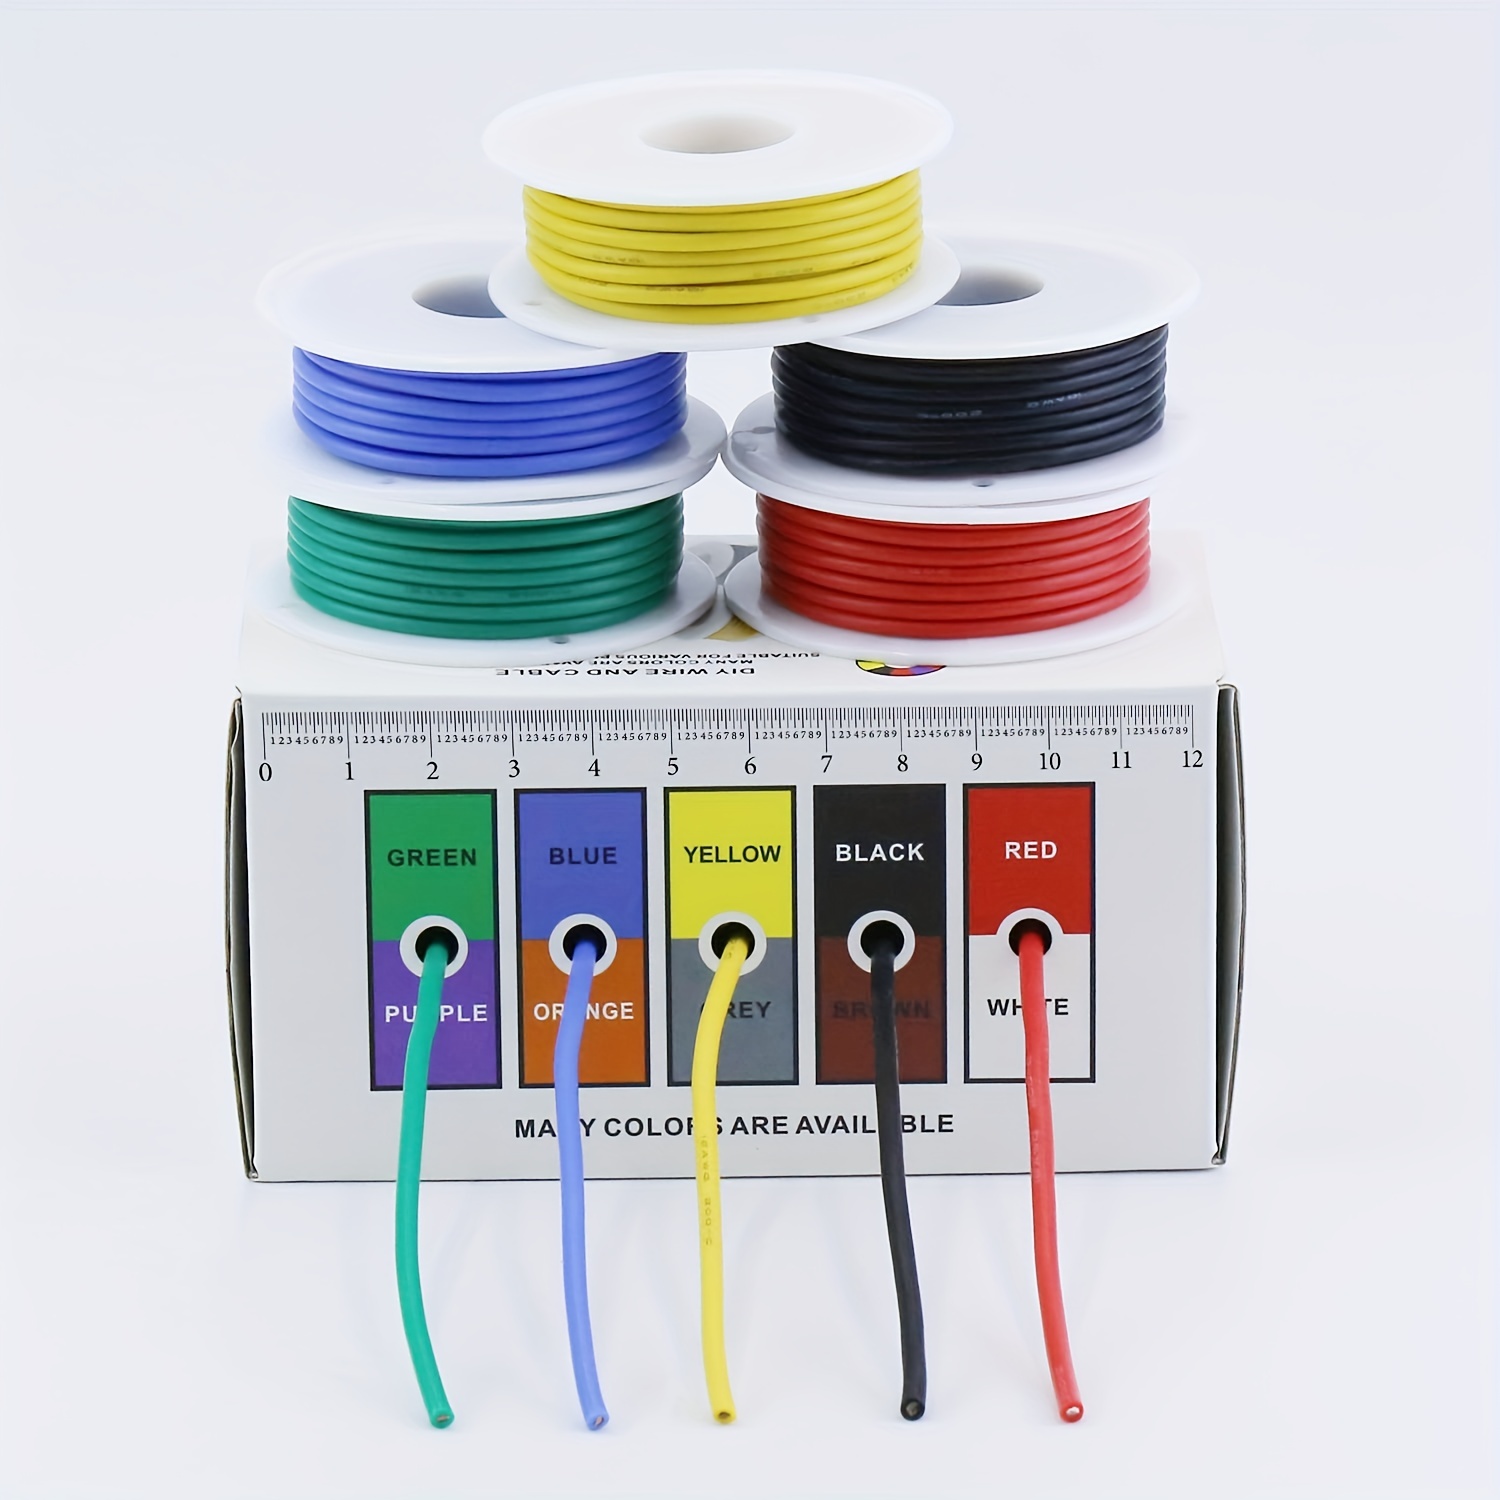 16 Awg Stranded Electrical Wire 16 Gauge Tinned Copper Wires